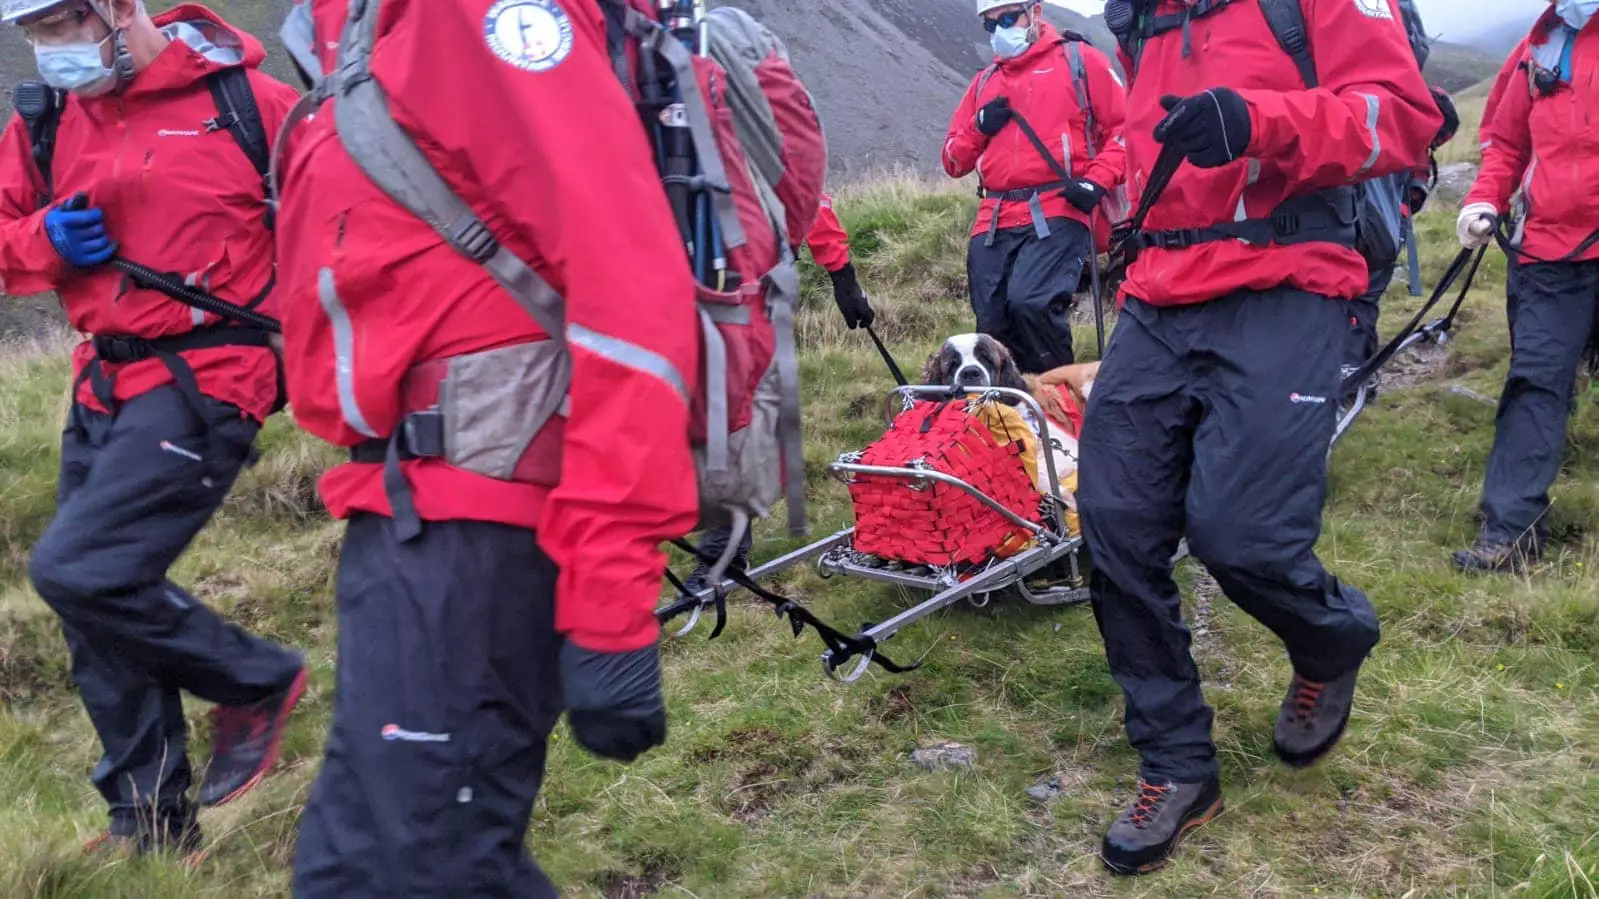 Daisy had to be carried down on a stretcher (